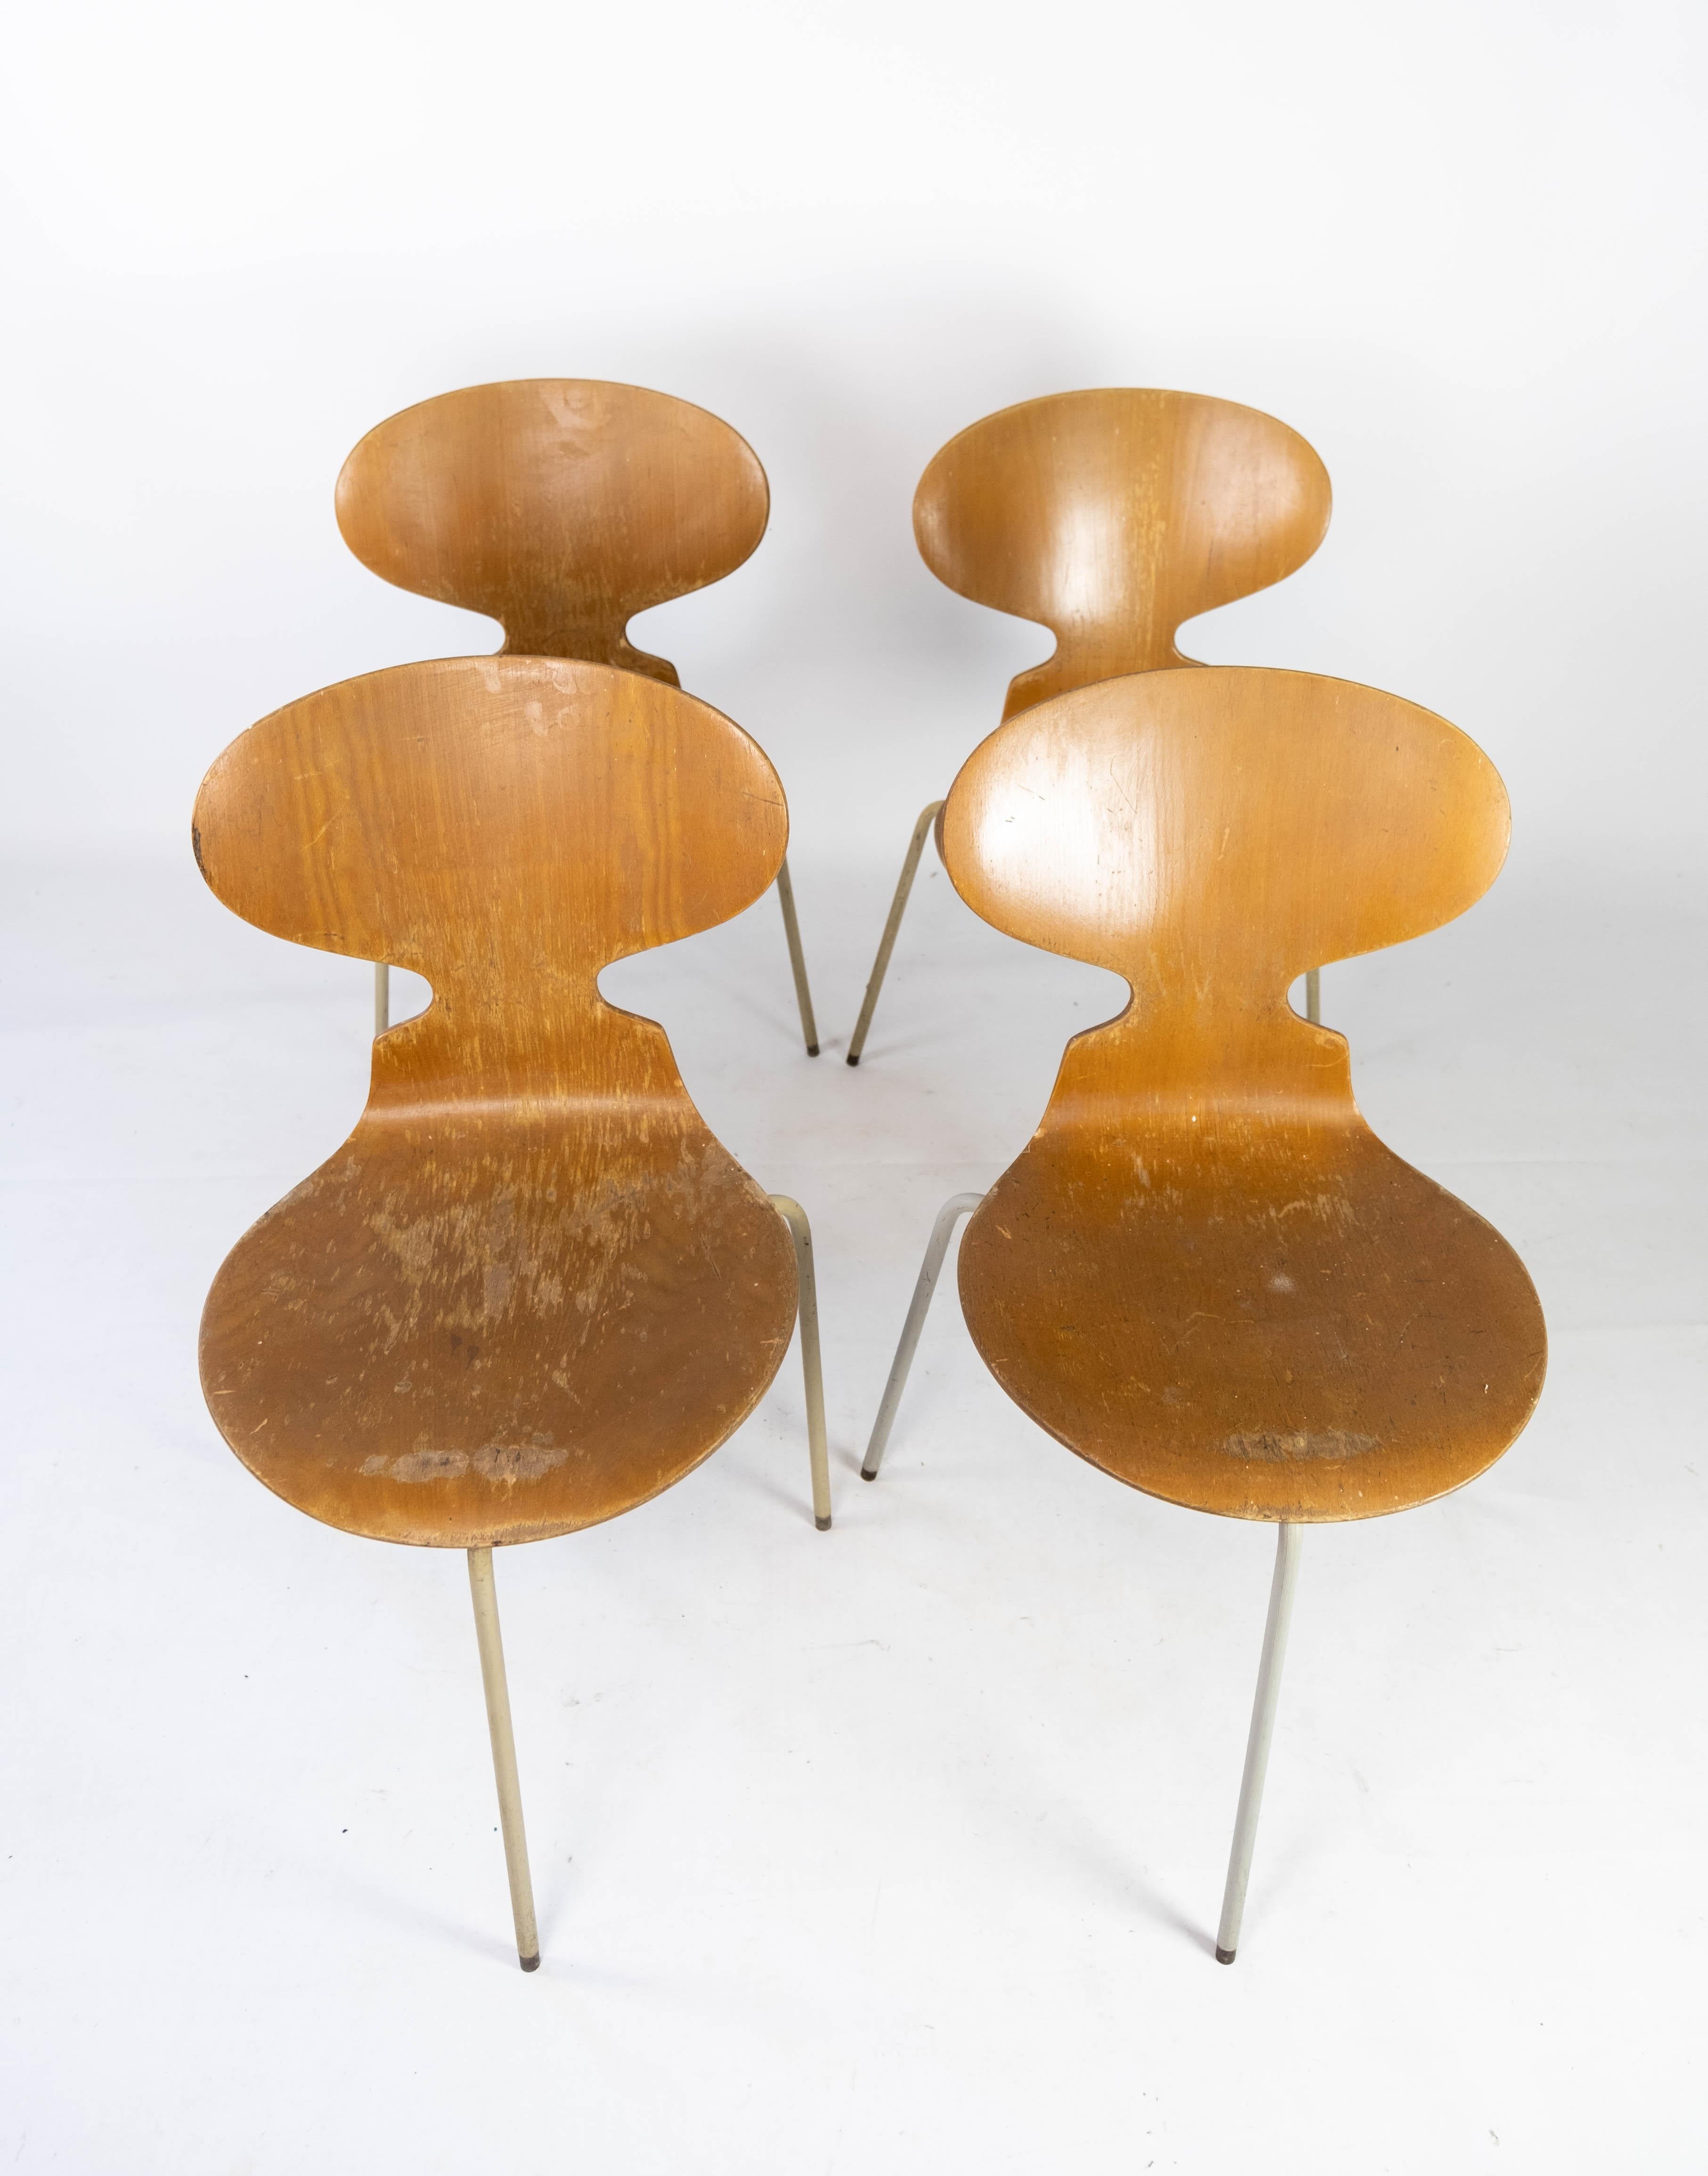 This set of four Ant chairs, model 3101, embodies the iconic design ethos of Danish architect and designer Arne Jacobsen. Created in 1952, these chairs represent a quintessential example of Scandinavian modernism, characterized by their sleek lines,